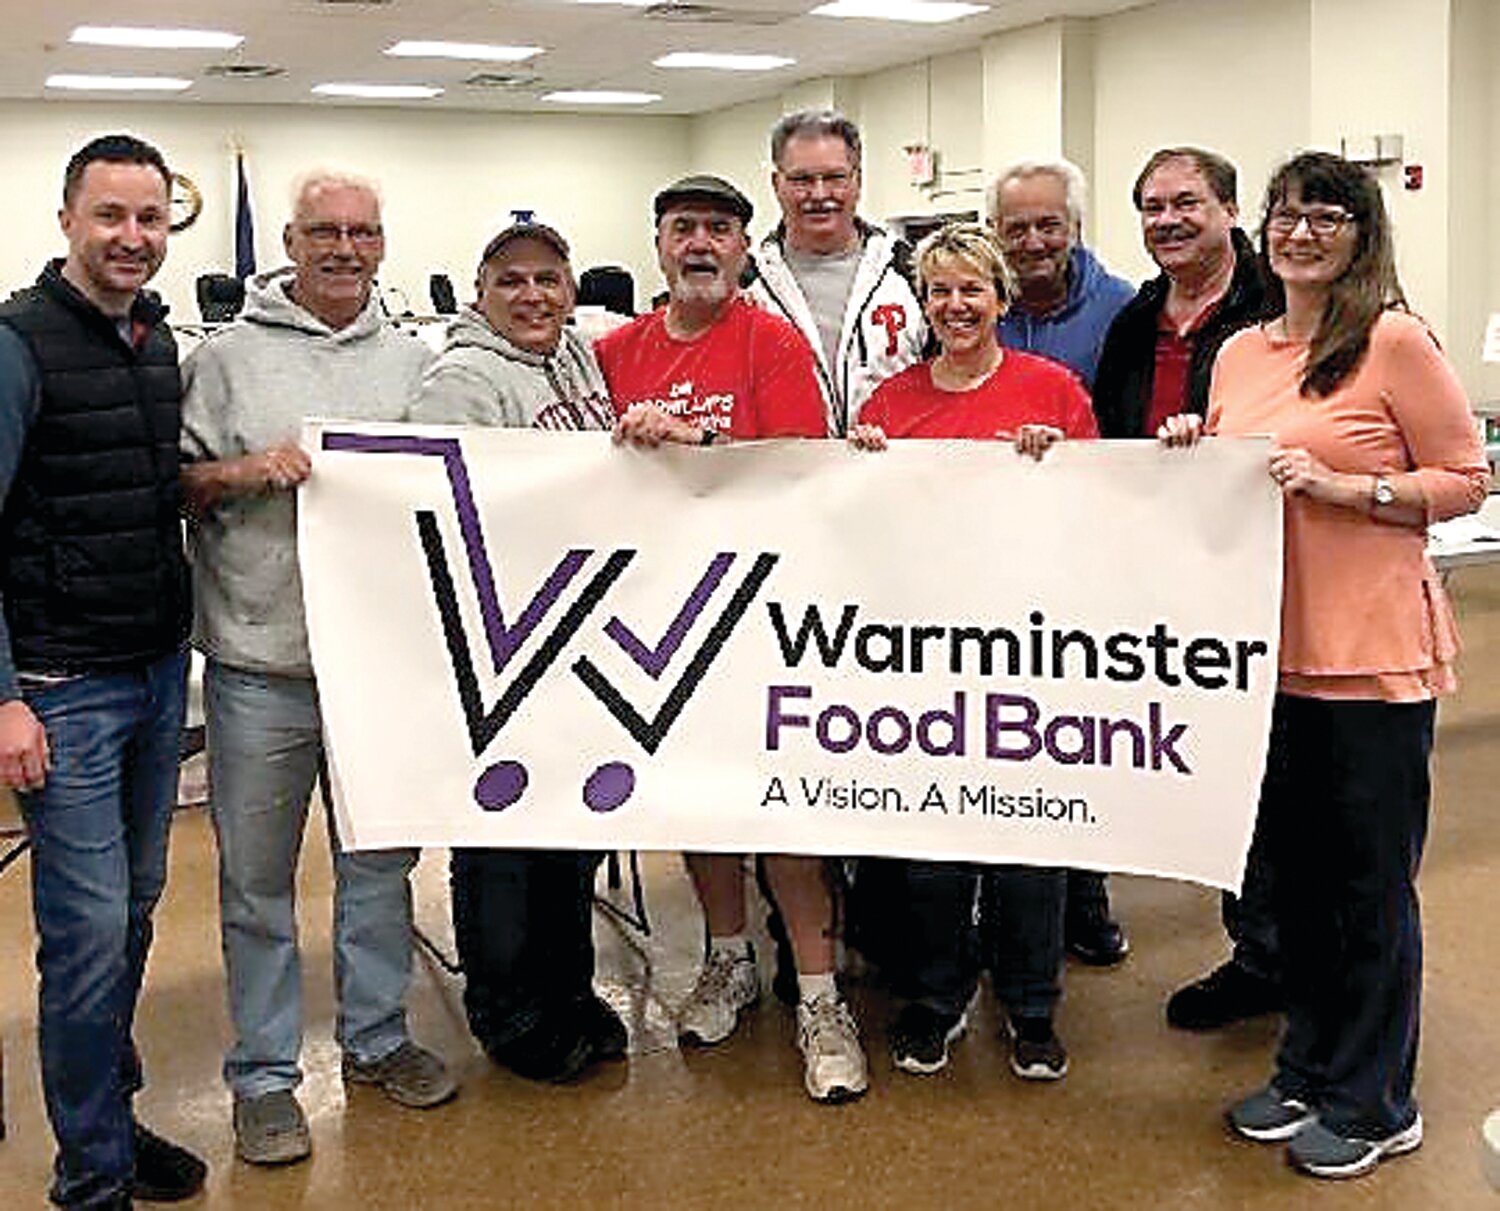 Members of the Warminster Republican Club helped sort all of the food drive donations at Warminster Food Bank on Saturday, April 13. The Food Drive was a collaboration between Warminster Food Bank, Warminster Rotary and Giant Supermarket of Warminster.